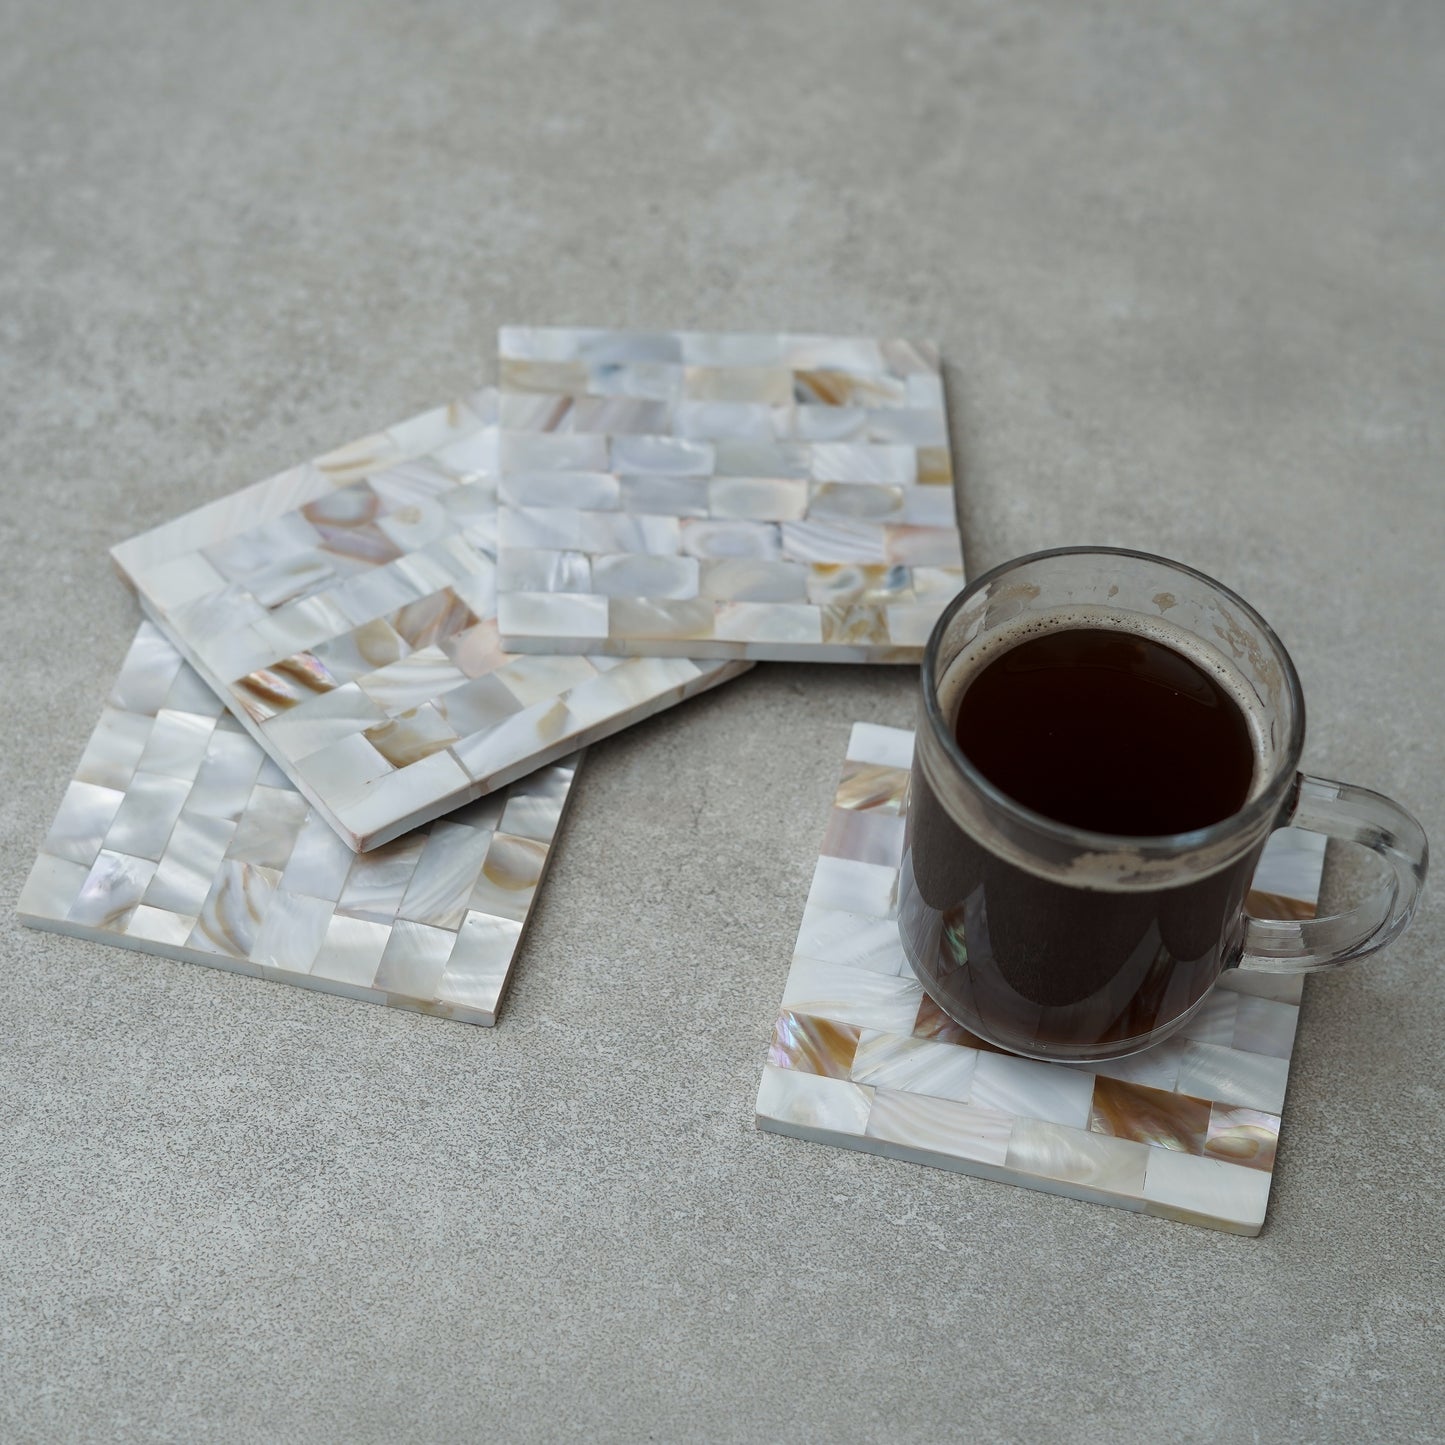 Mother of Pearl Coaster Set of 4 for Tea Coffee Cocktail Handmade MOP Coaster for Hot & Cold Drinks Coaster for Dining Table Home and Office Square- Off White